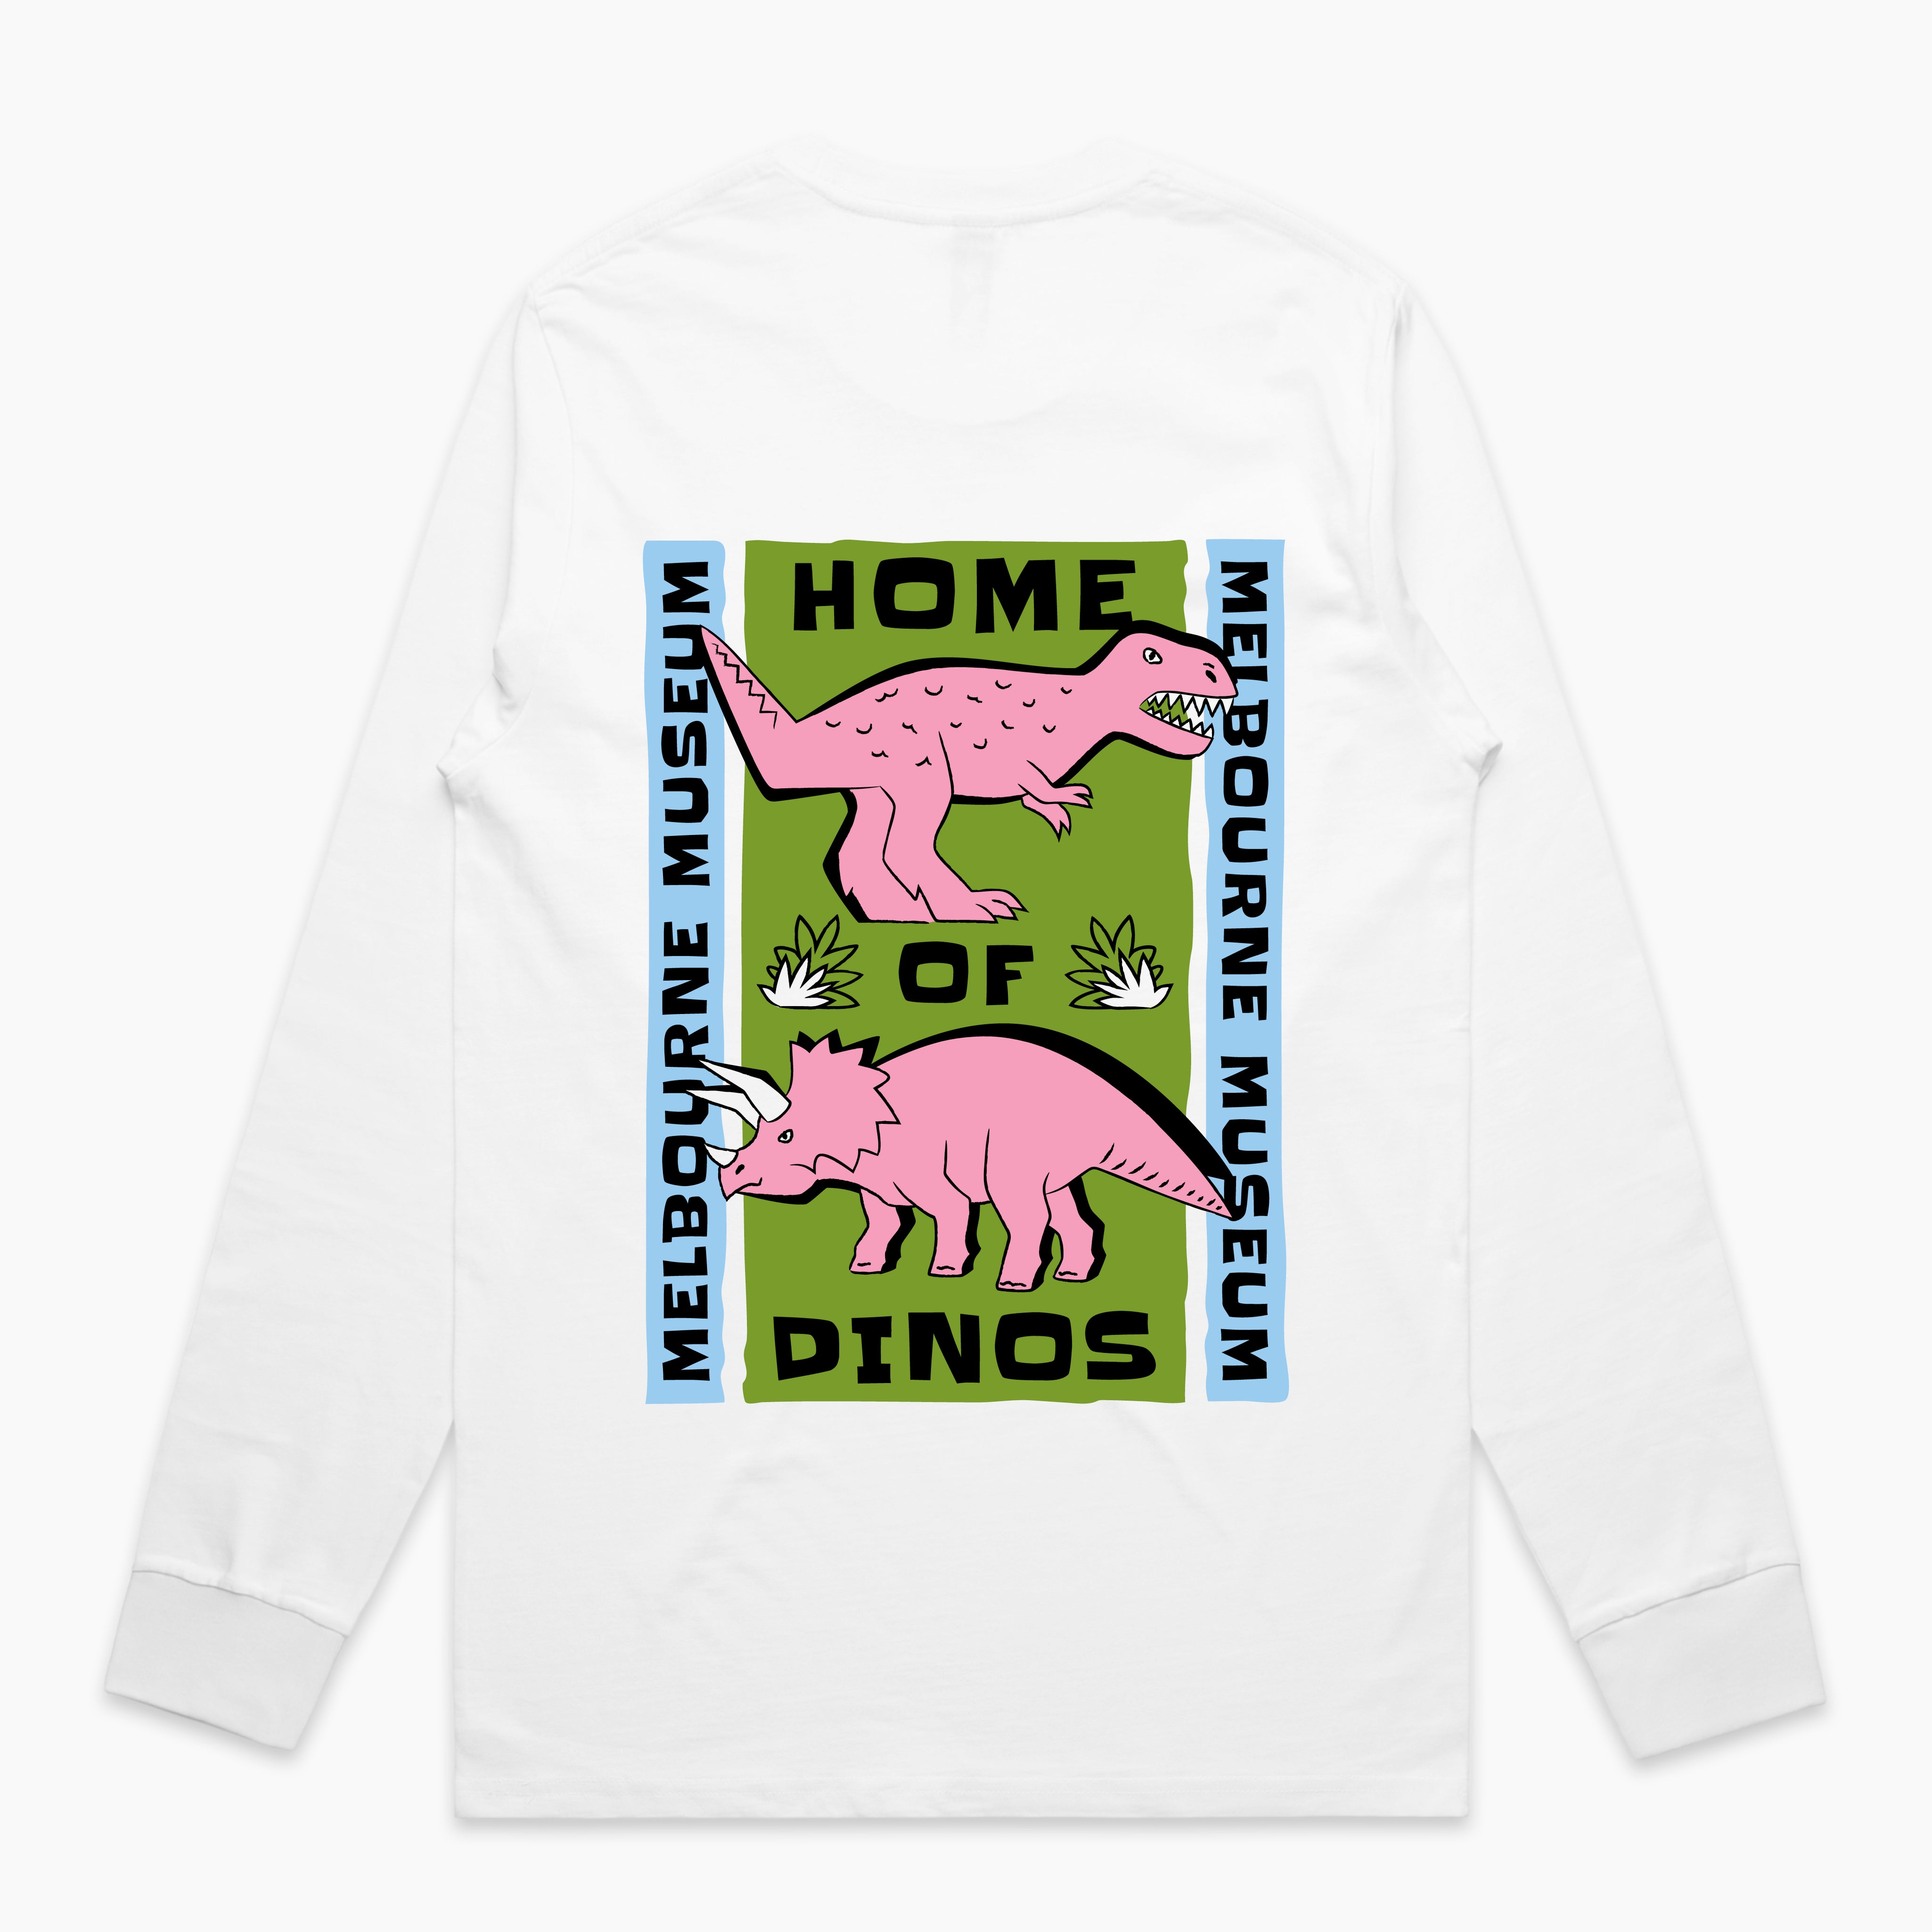 Home of Dinos White Dino and Green Long Sleeve Tee